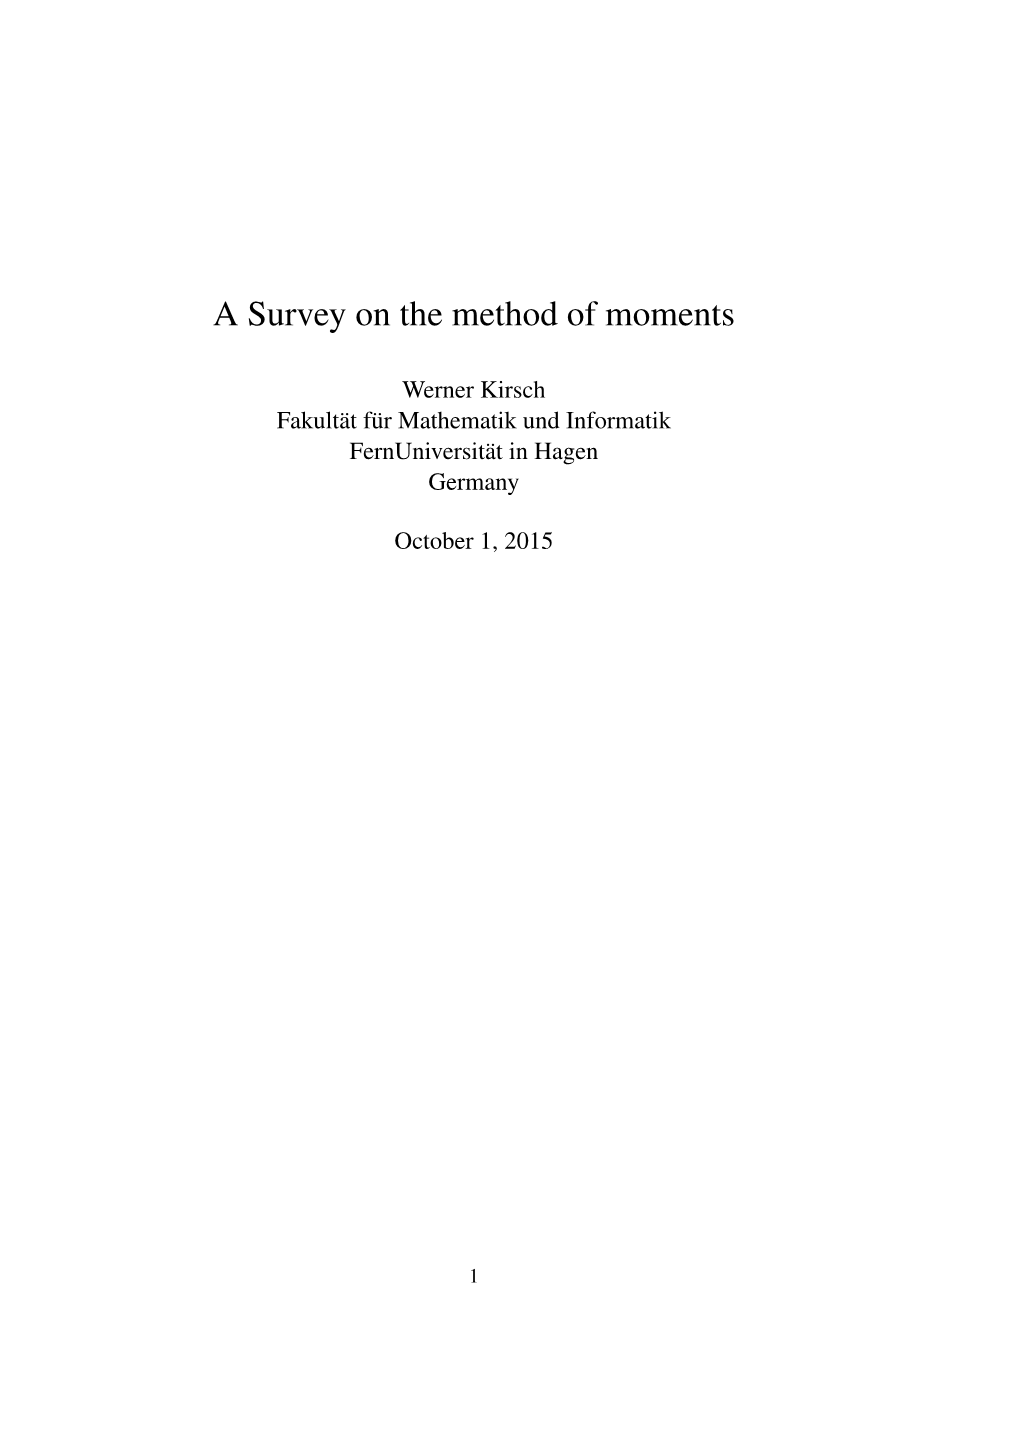 A Survey on the Method of Moments